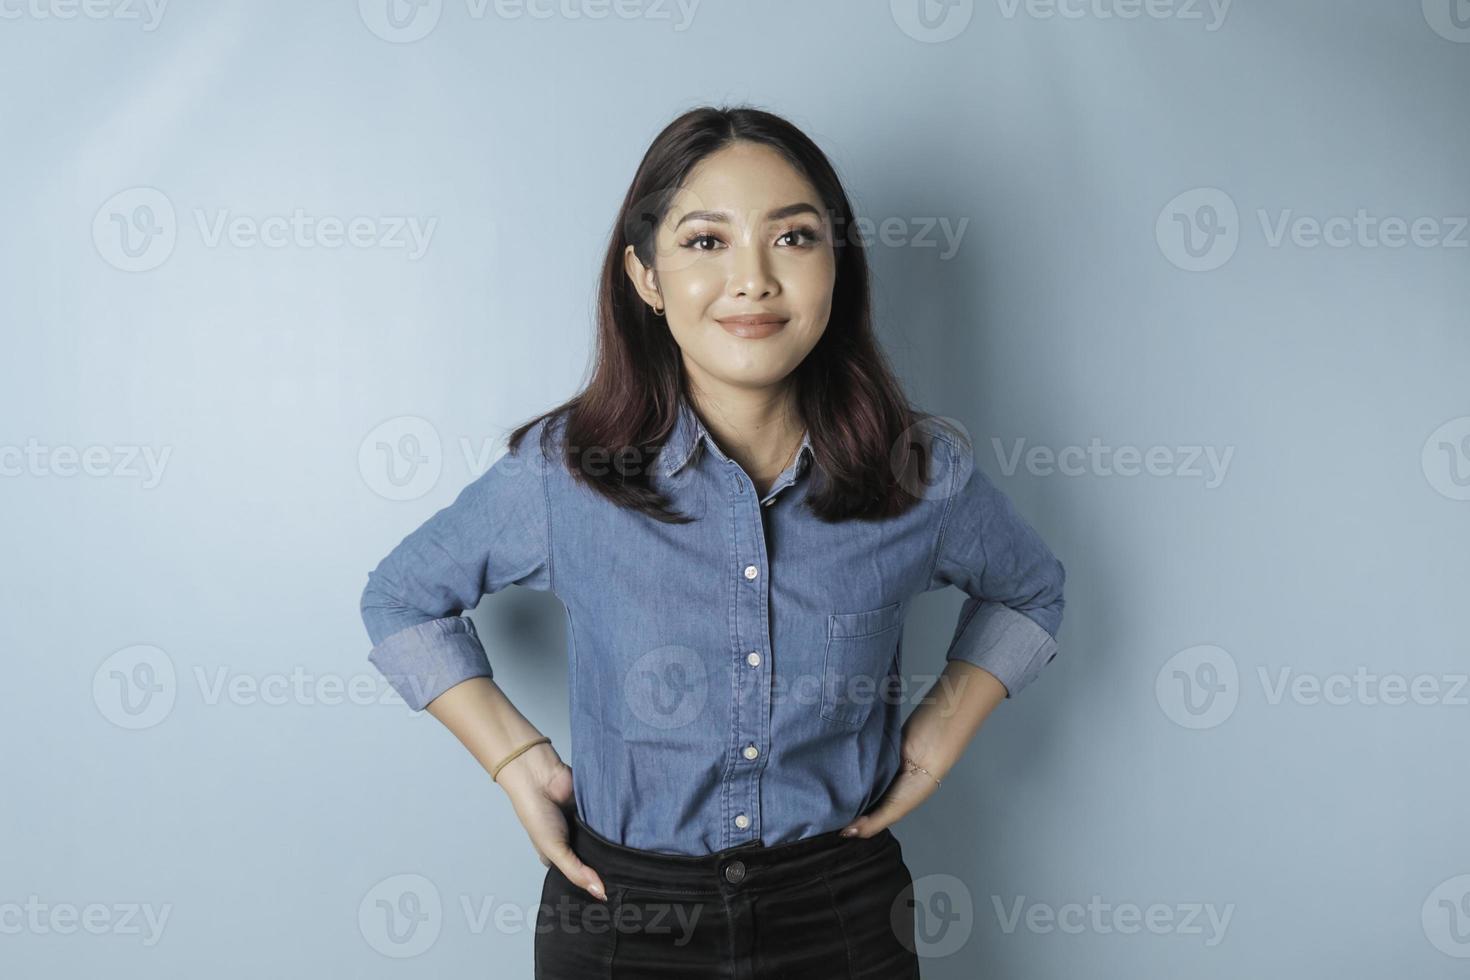 Portrait of a confident smiling girl standing with arms folded and looking at the camera isolated over blue background, wearing a blue shirt photo